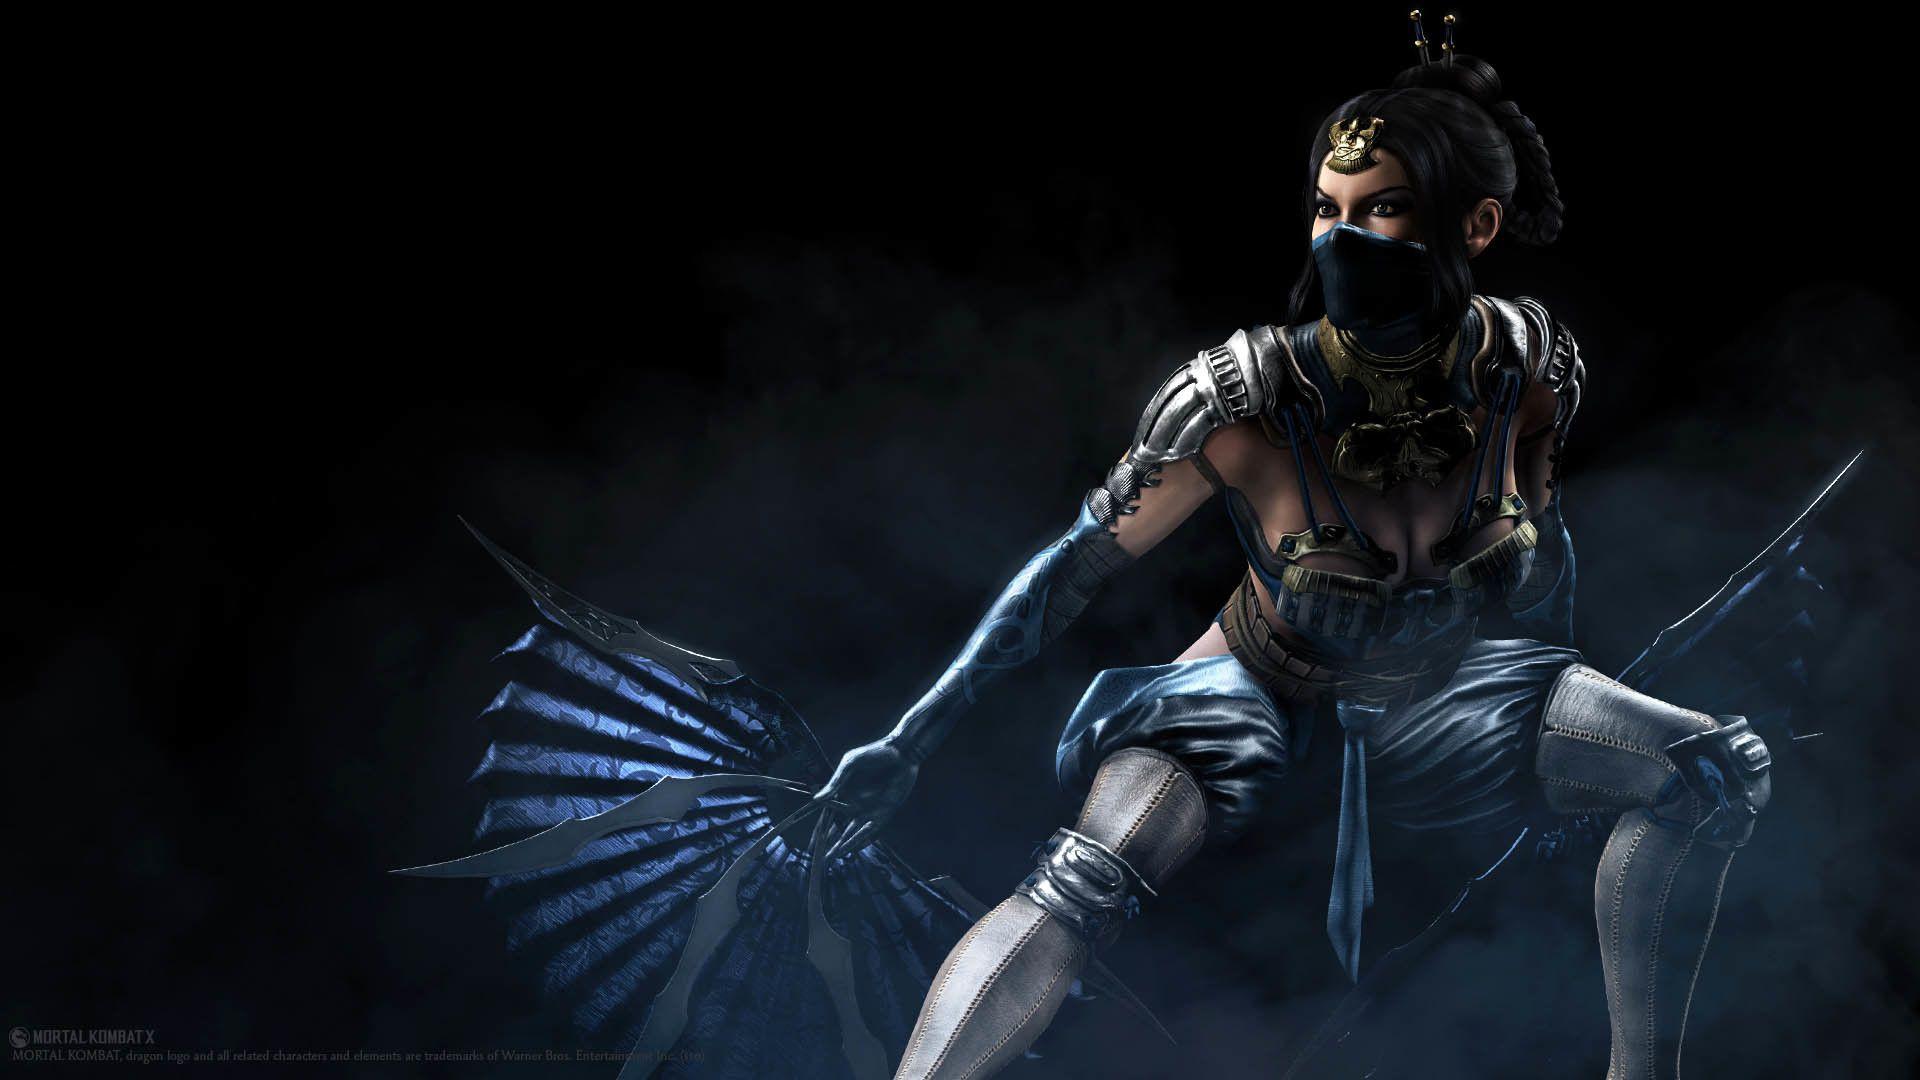 Kitana Wallpaper (4k resolution), made by me. If you want you can use it.  Please do credit me if you use it. I recreated the entire pose manually. :  r/MortalKombat